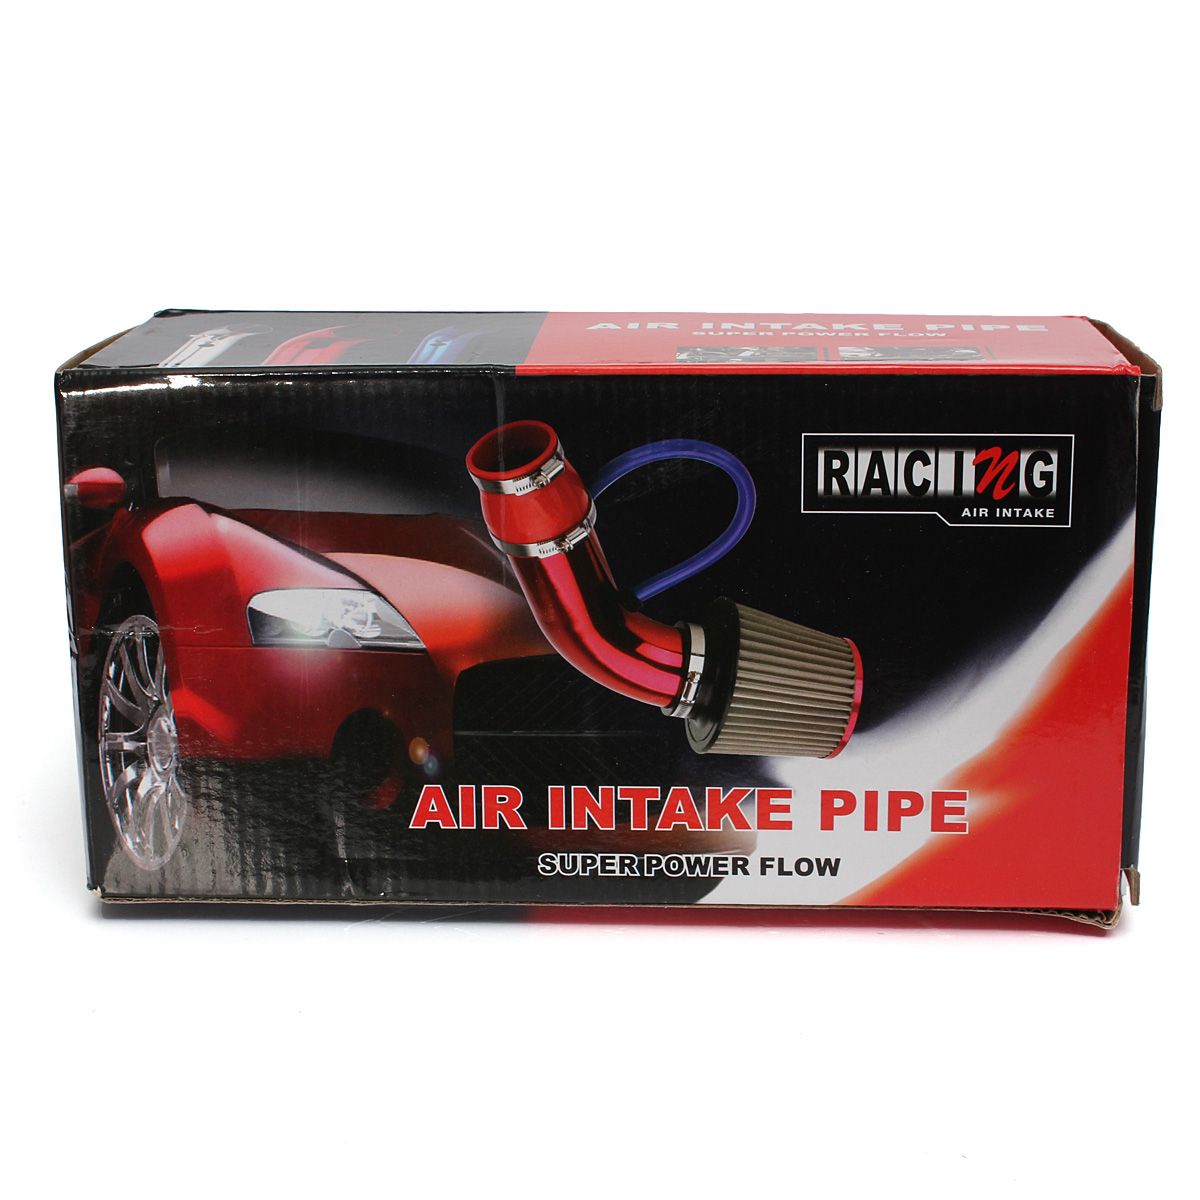 Universal-Performance-Cold-Air-Intake-Filter-Alumimum-Induction-Pipe-HOSE-System-1013687